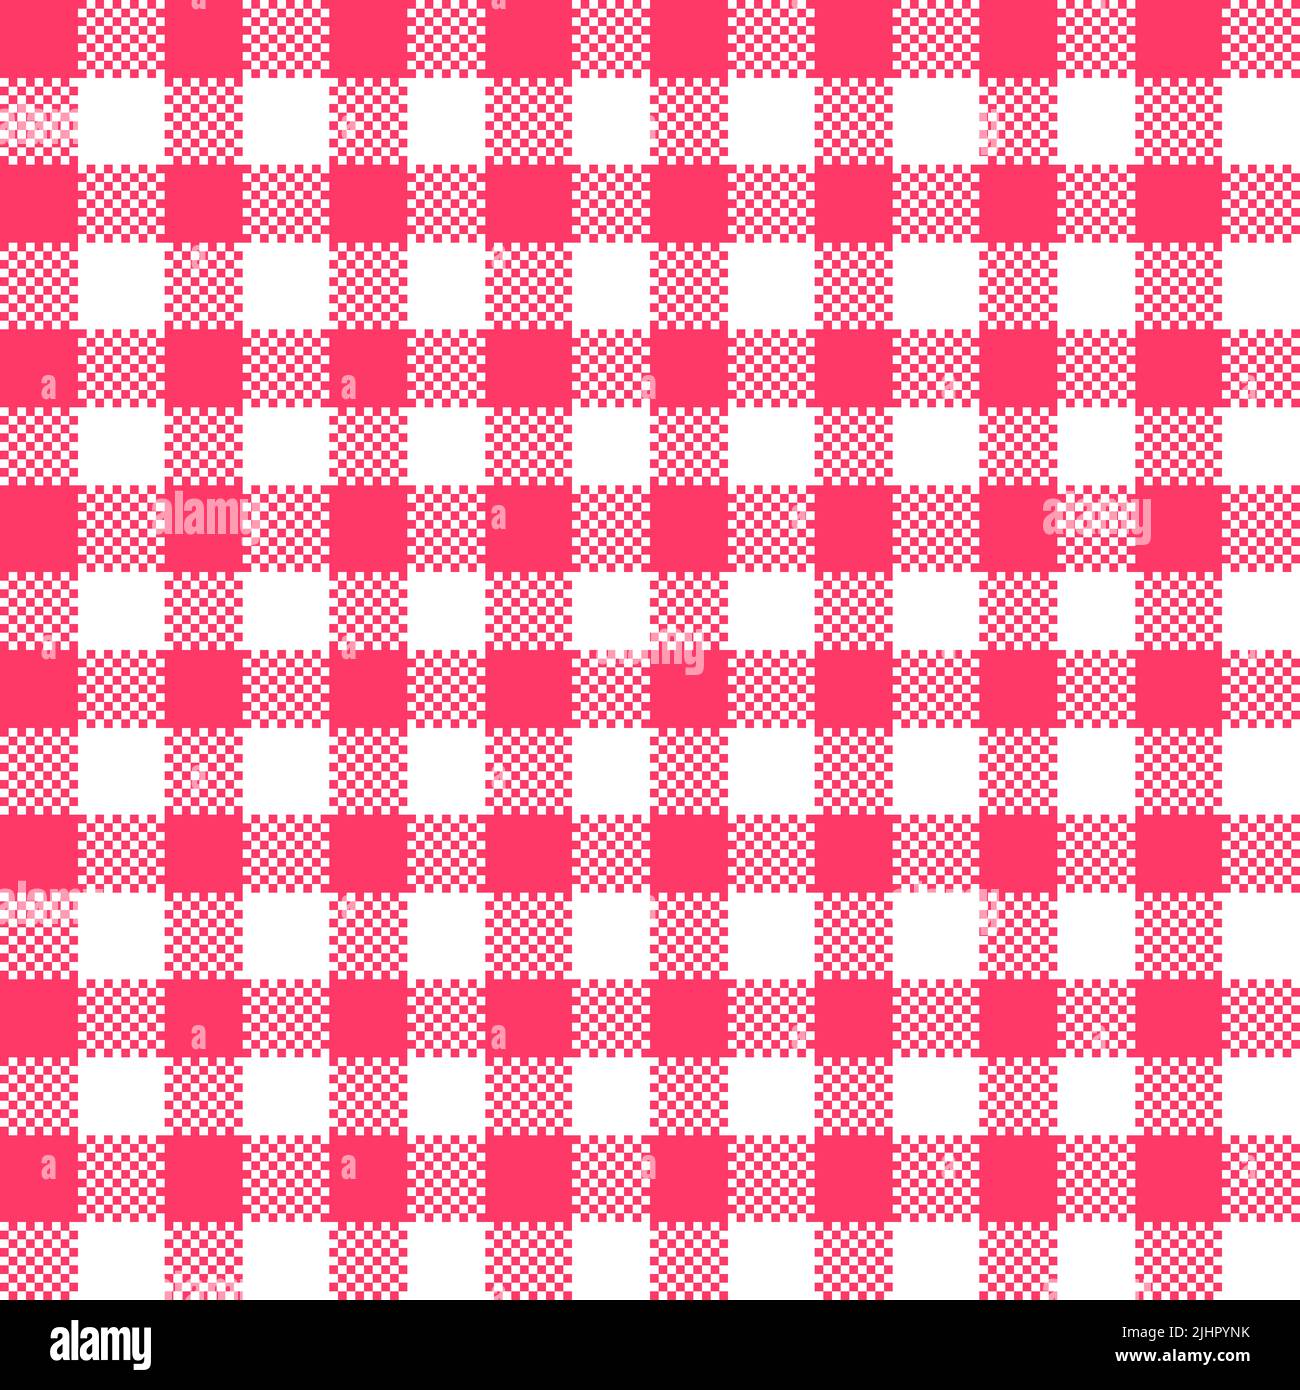 Gingham Pattern. Seamless white pink plain check pattern. Good for blankets, wraps, packages, dresses, skirts, napkins. Stock Photo